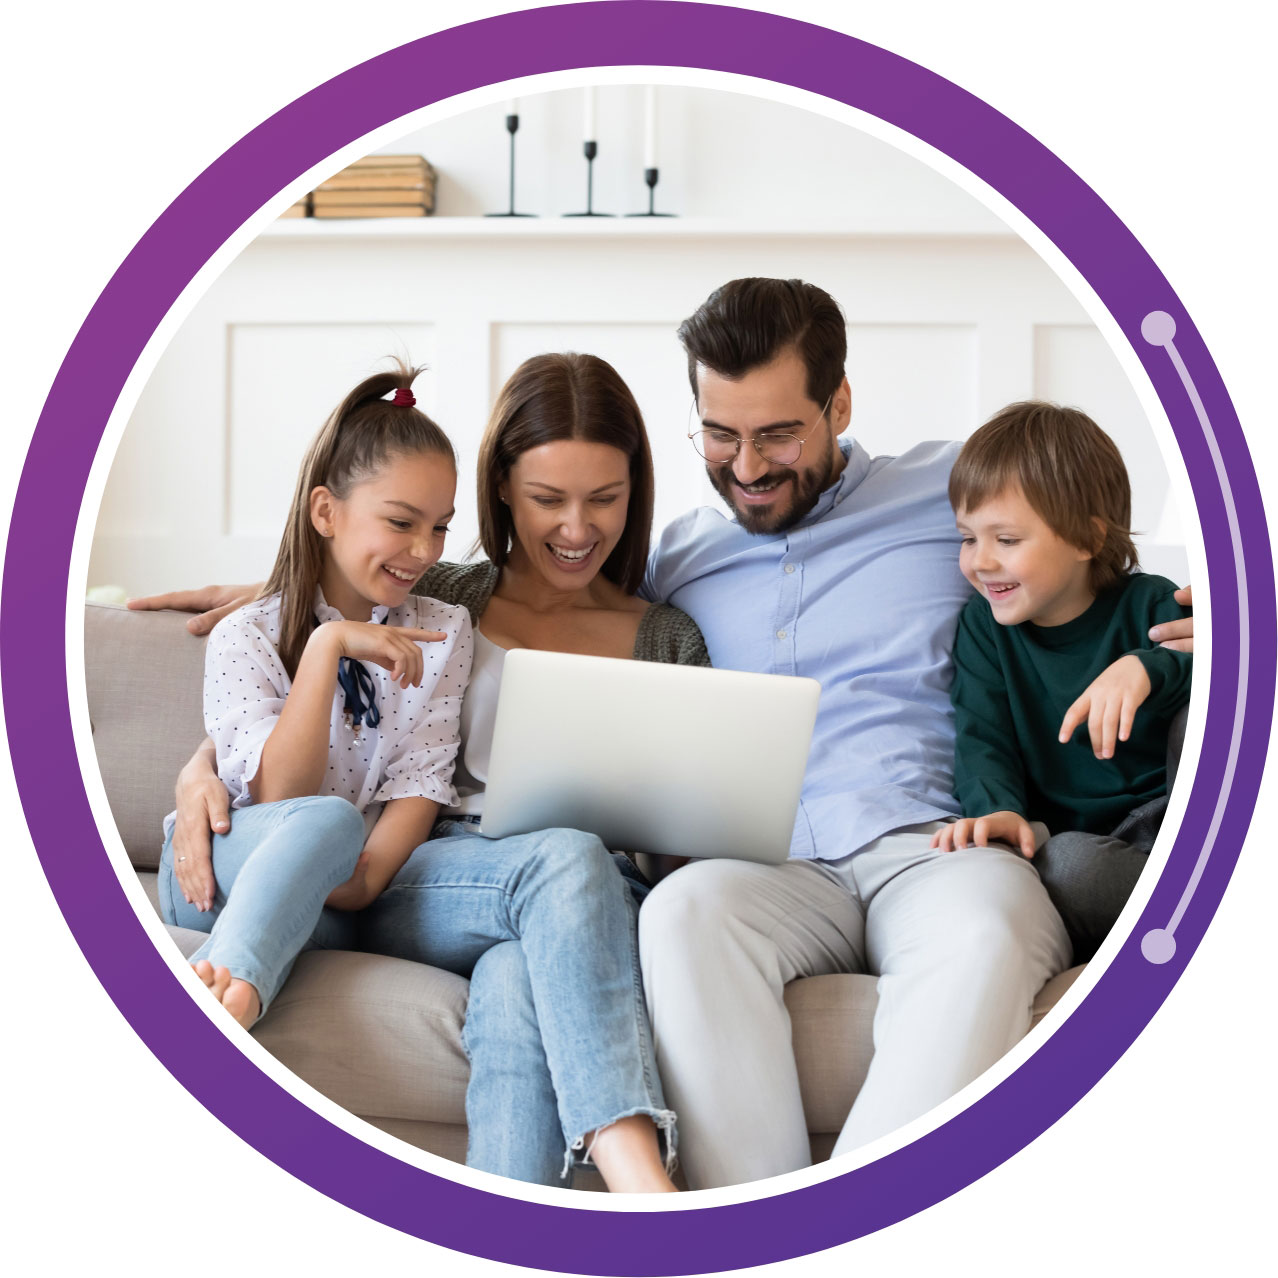 There's a family on a couch smiling as they have a video call with their relatives from another state. There's a purple circle around the image.